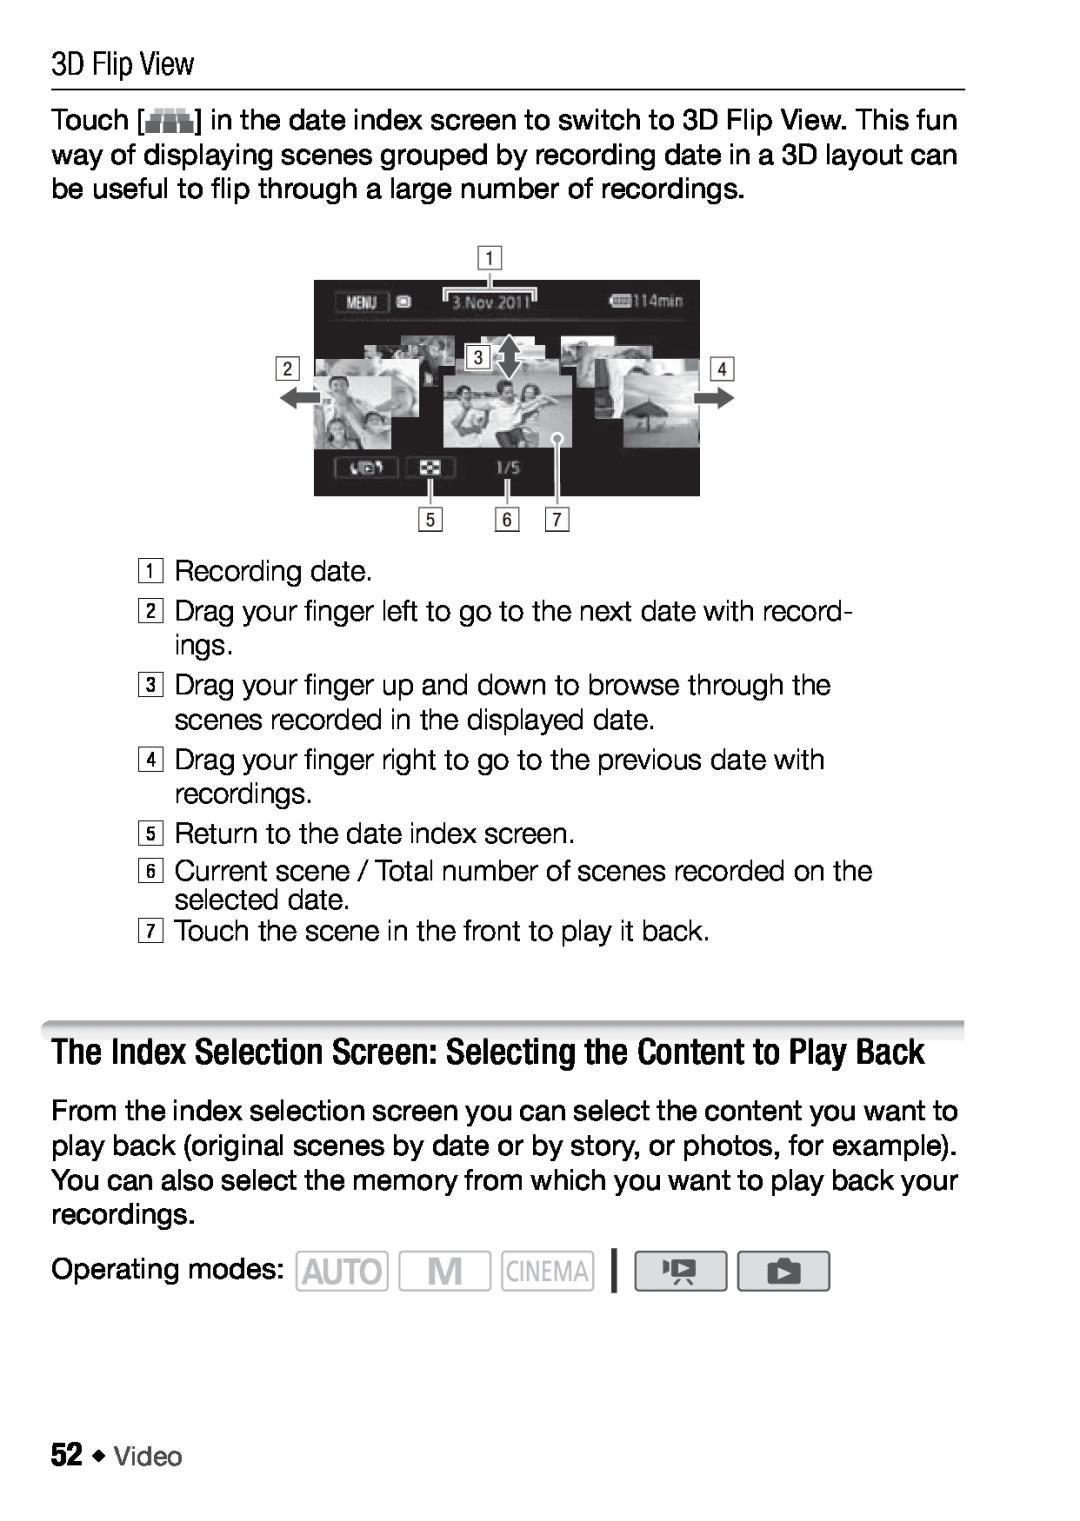 Canon HFM406, HFM46 instruction manual The Index Selection Screen Selecting the Content to Play Back, 3D Flip View 